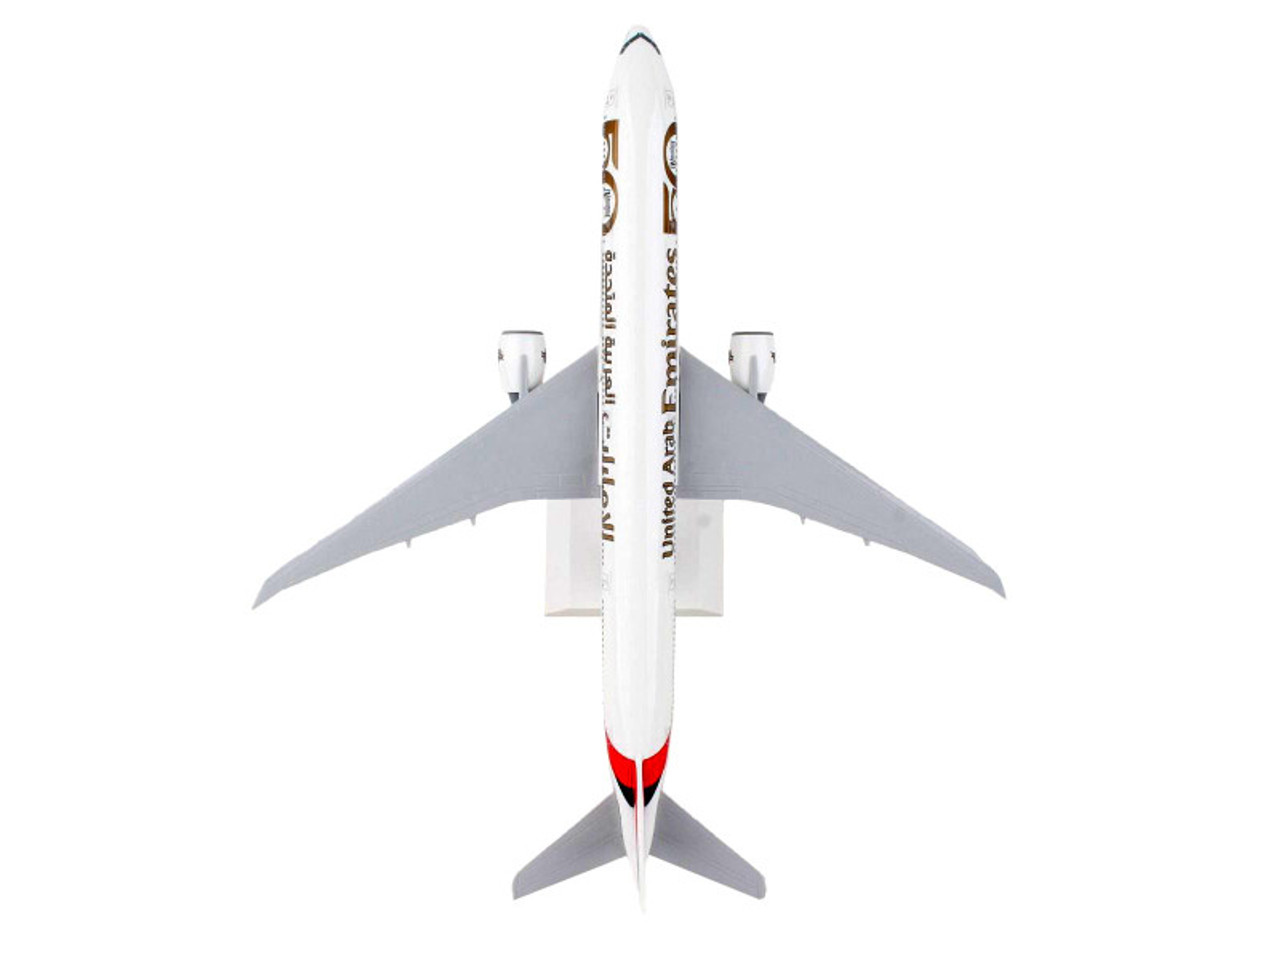 Boeing 777-300ER Commercial Aircraft with Landing Gear "Emirates Airlines - 50th Anniversary" (A6-EPO) White with Tail Graphics (Snap-Fit) 1/200 Plastic Model by Skymarks